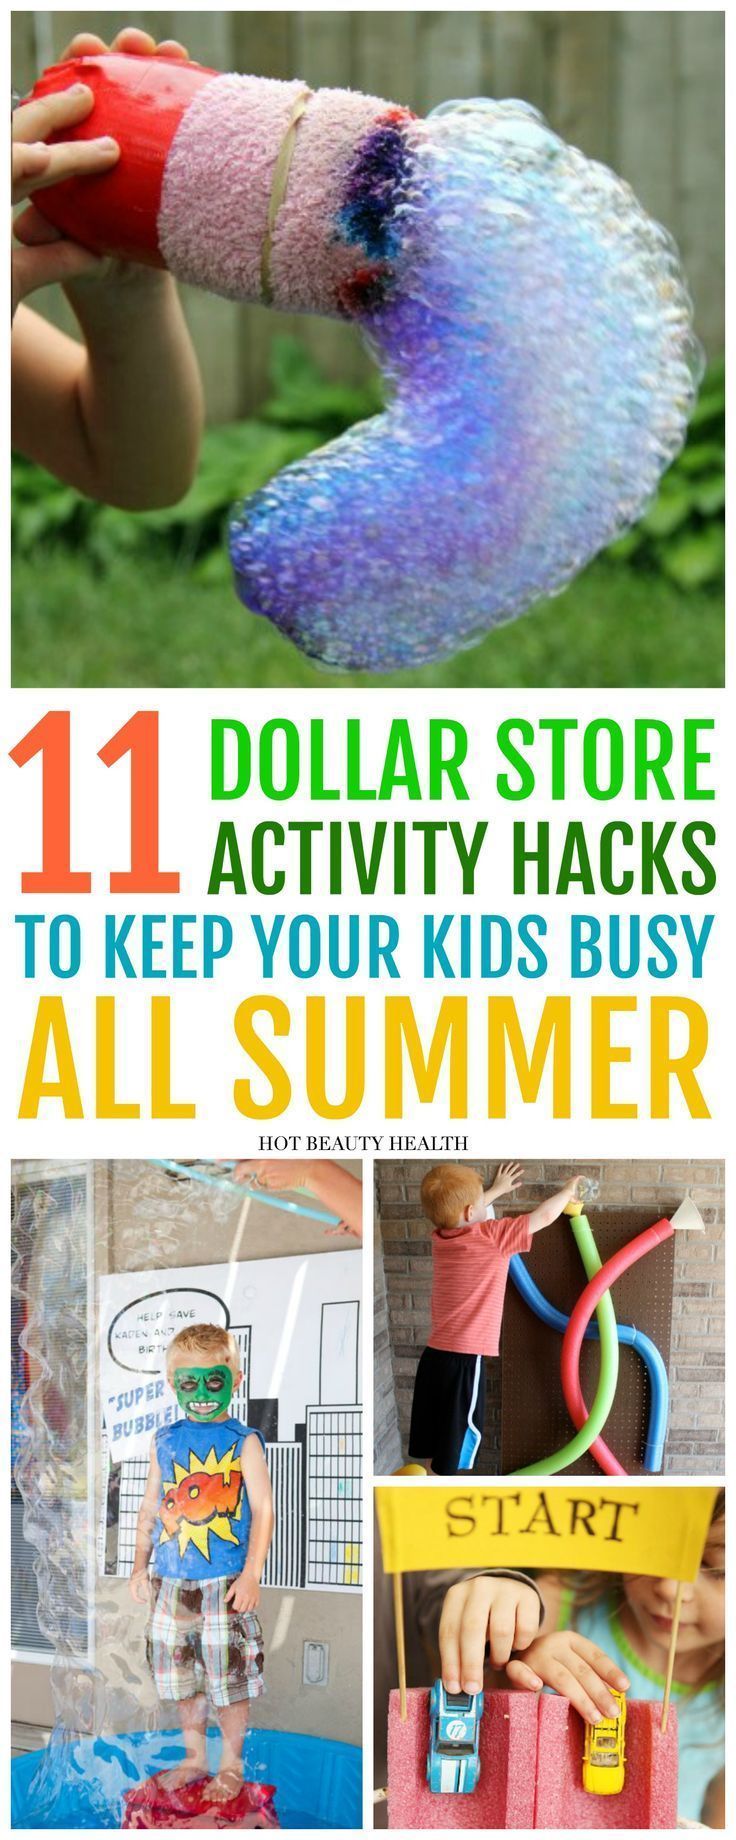 15 diy projects For The Home hacks ideas